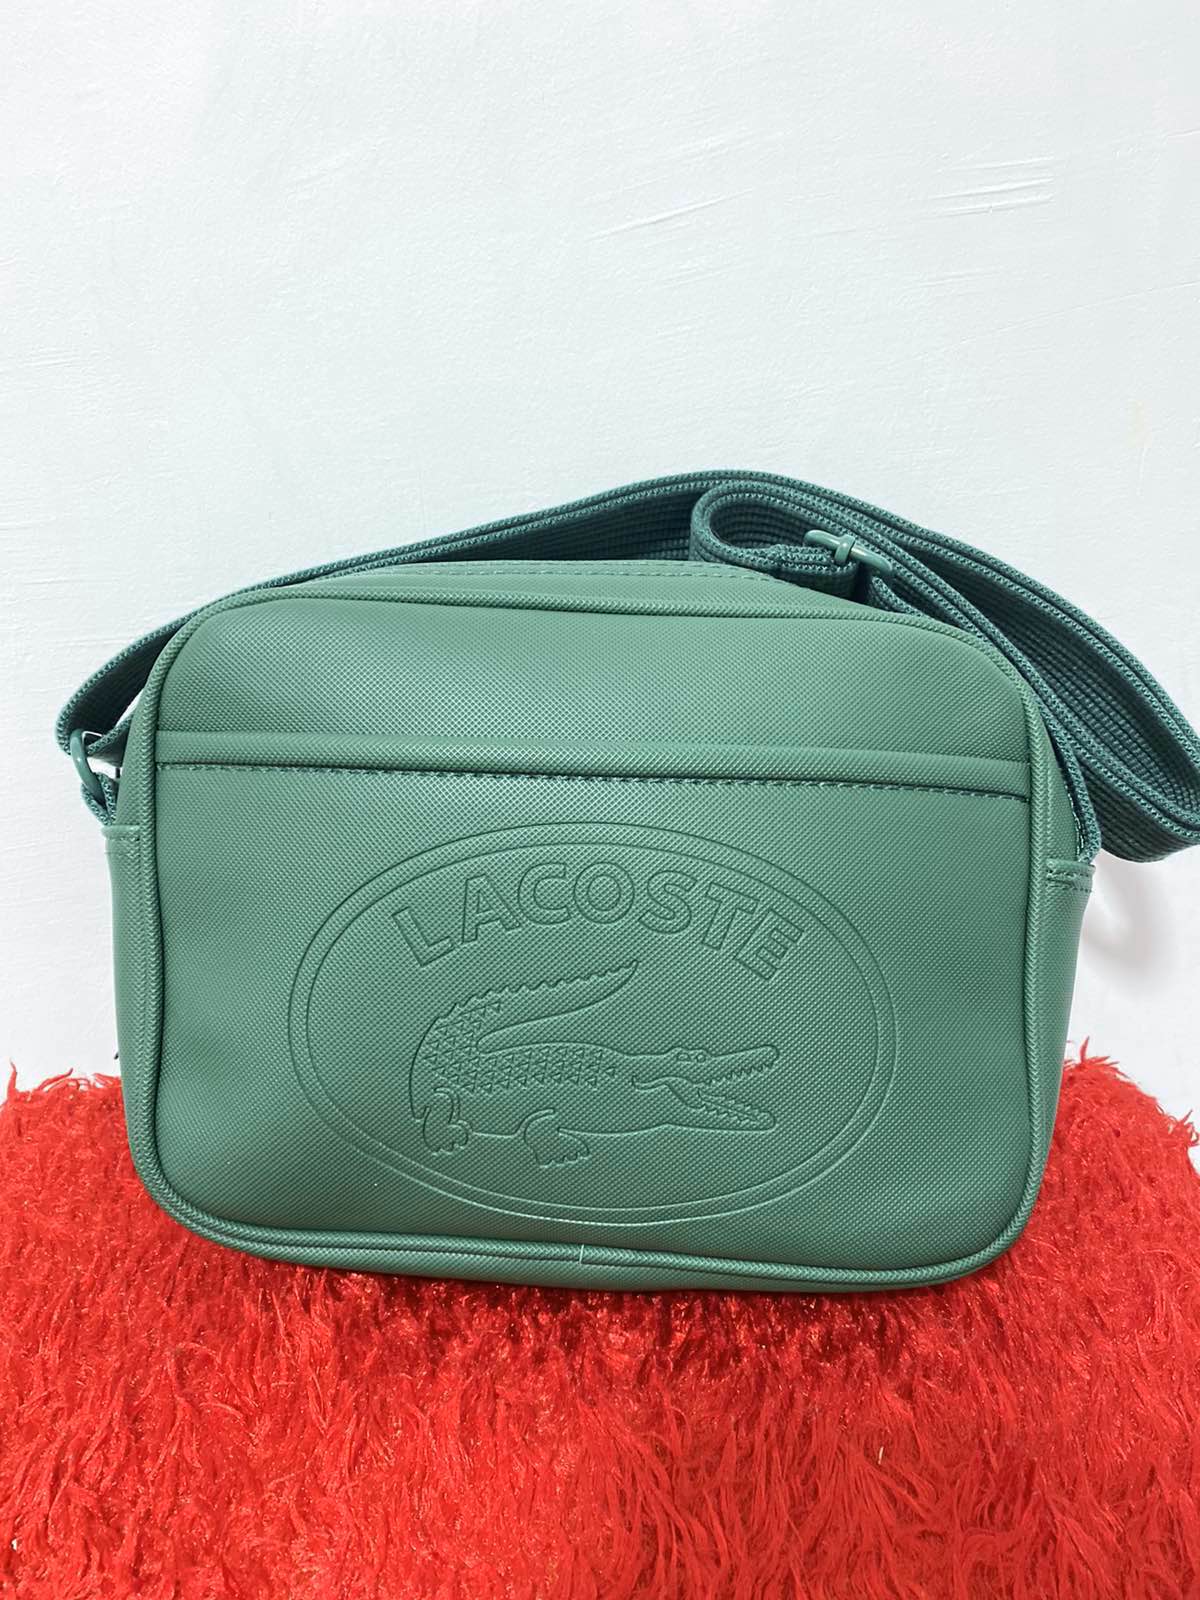 lacoste sling bags price